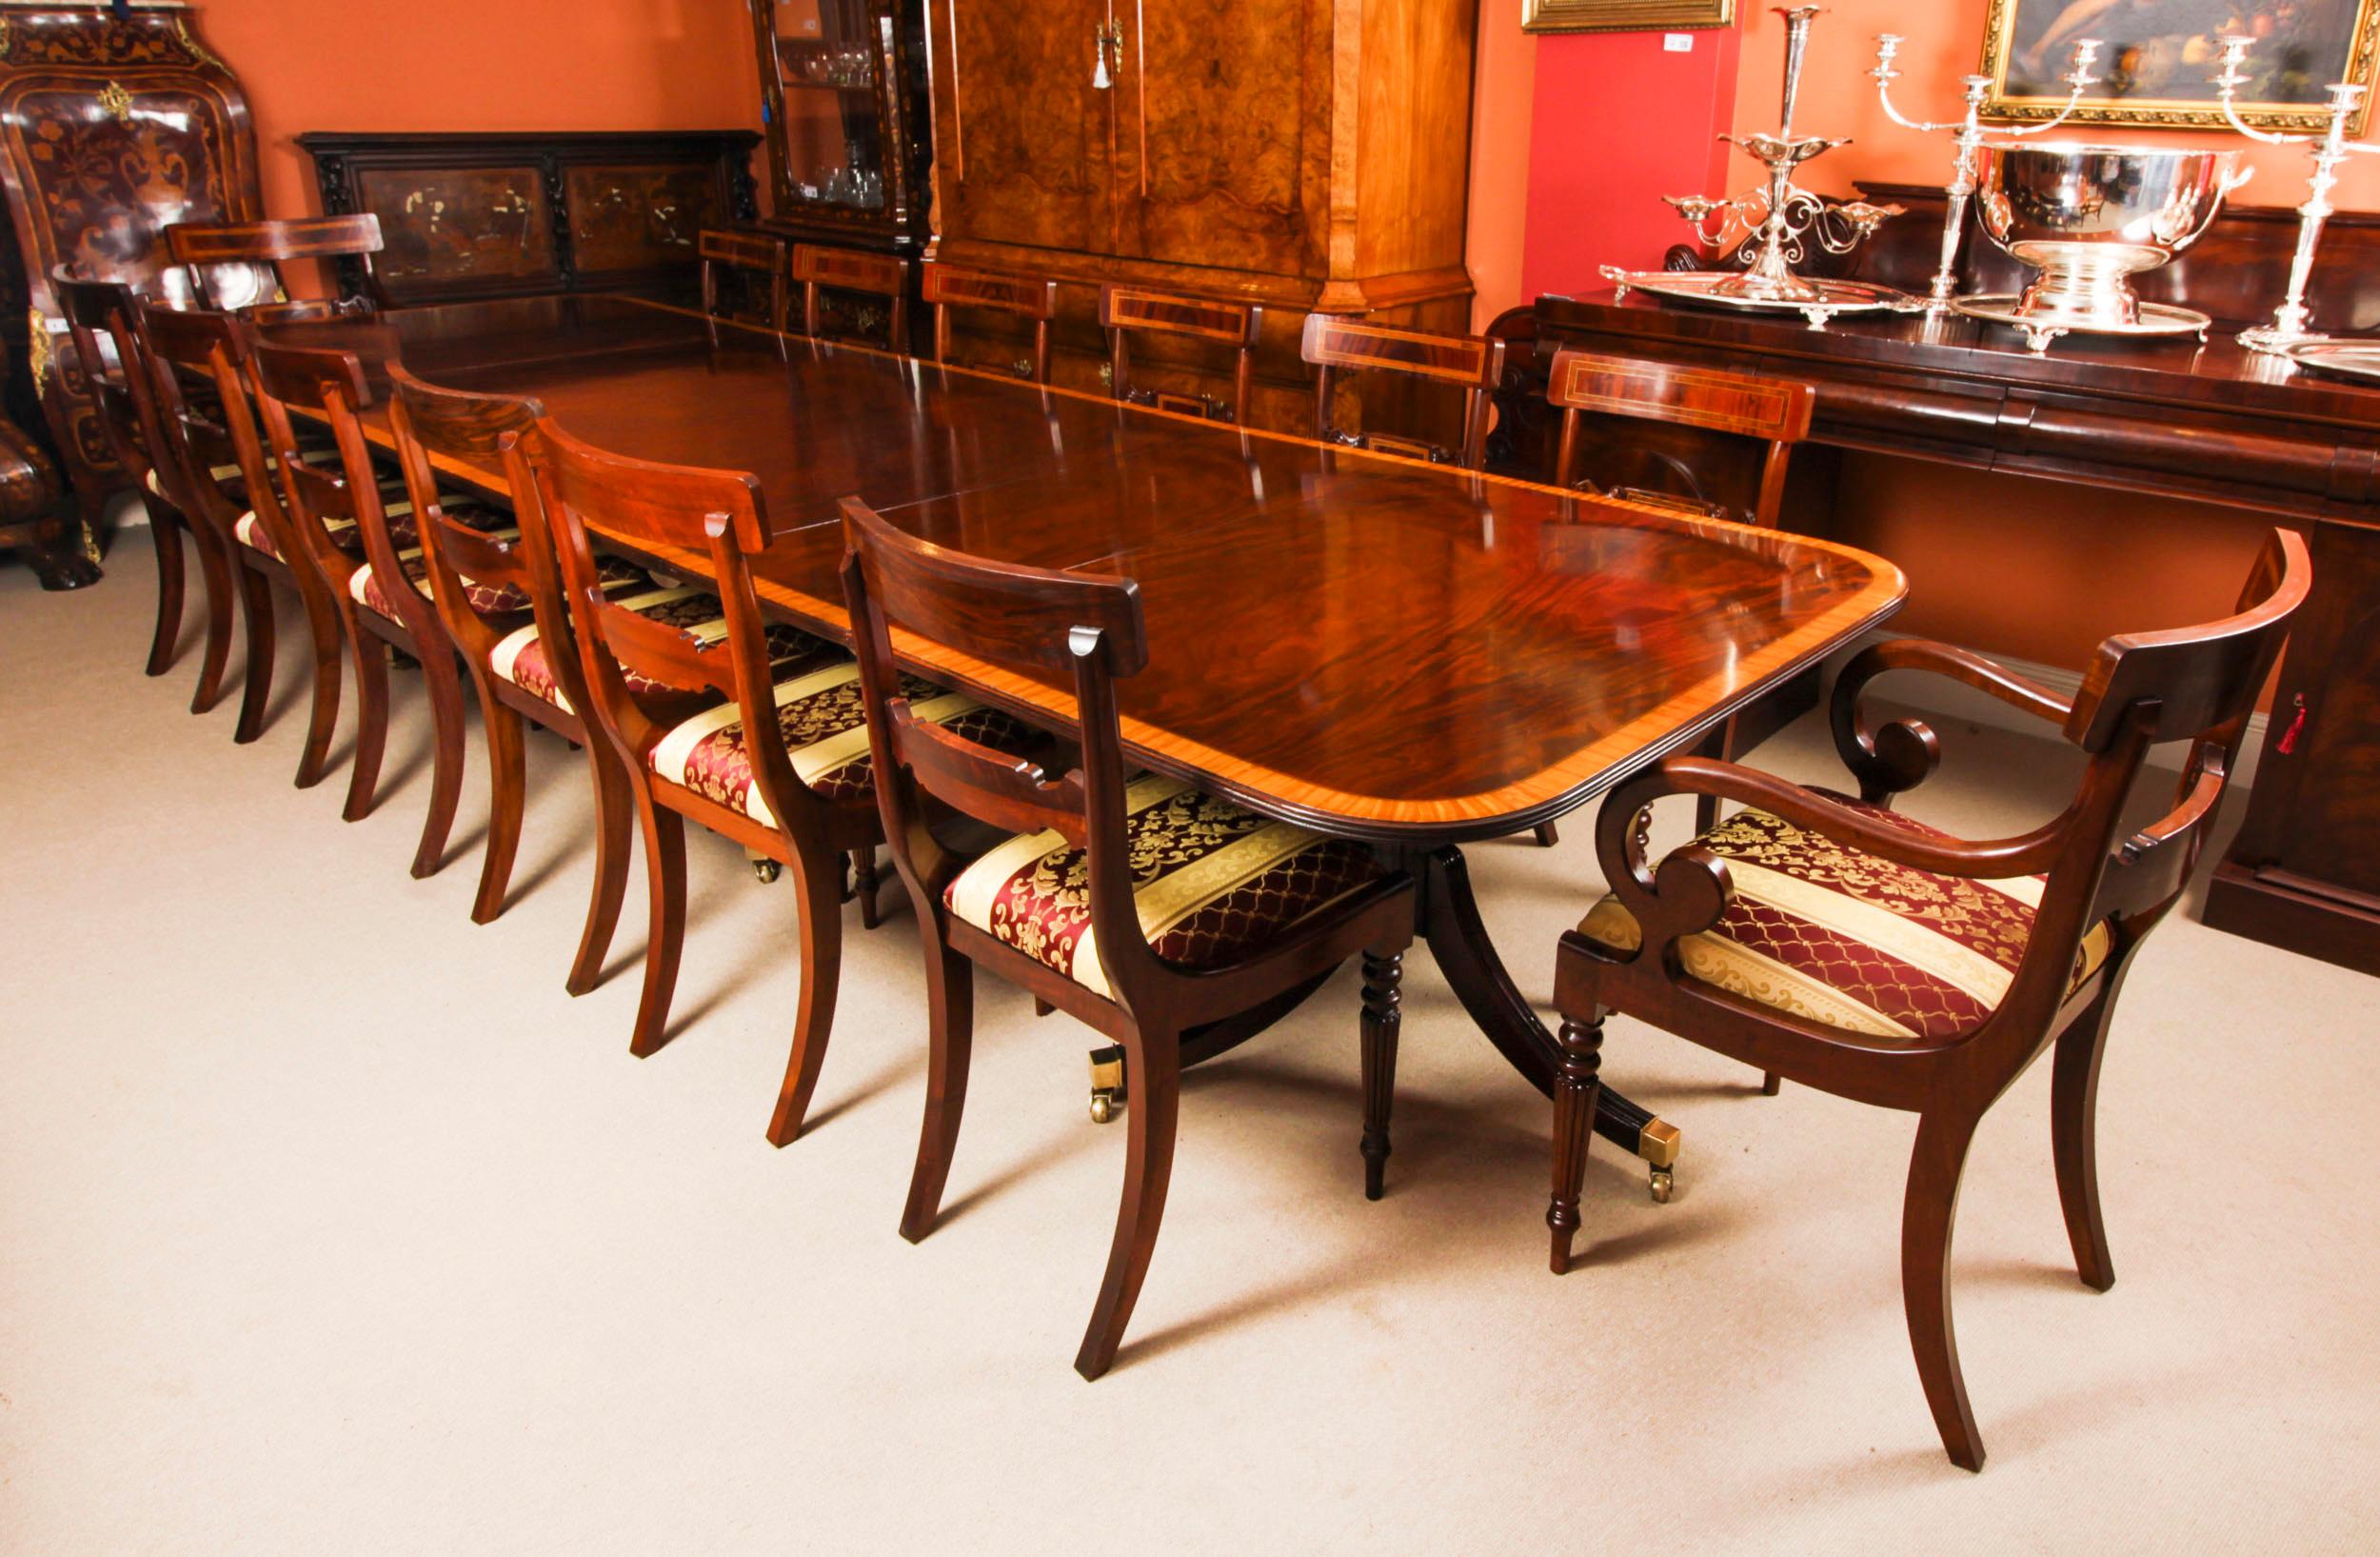 Vintage 13ft Three Pillar Mahogany Dining Table with 14 Chairs 20th C For Sale 14